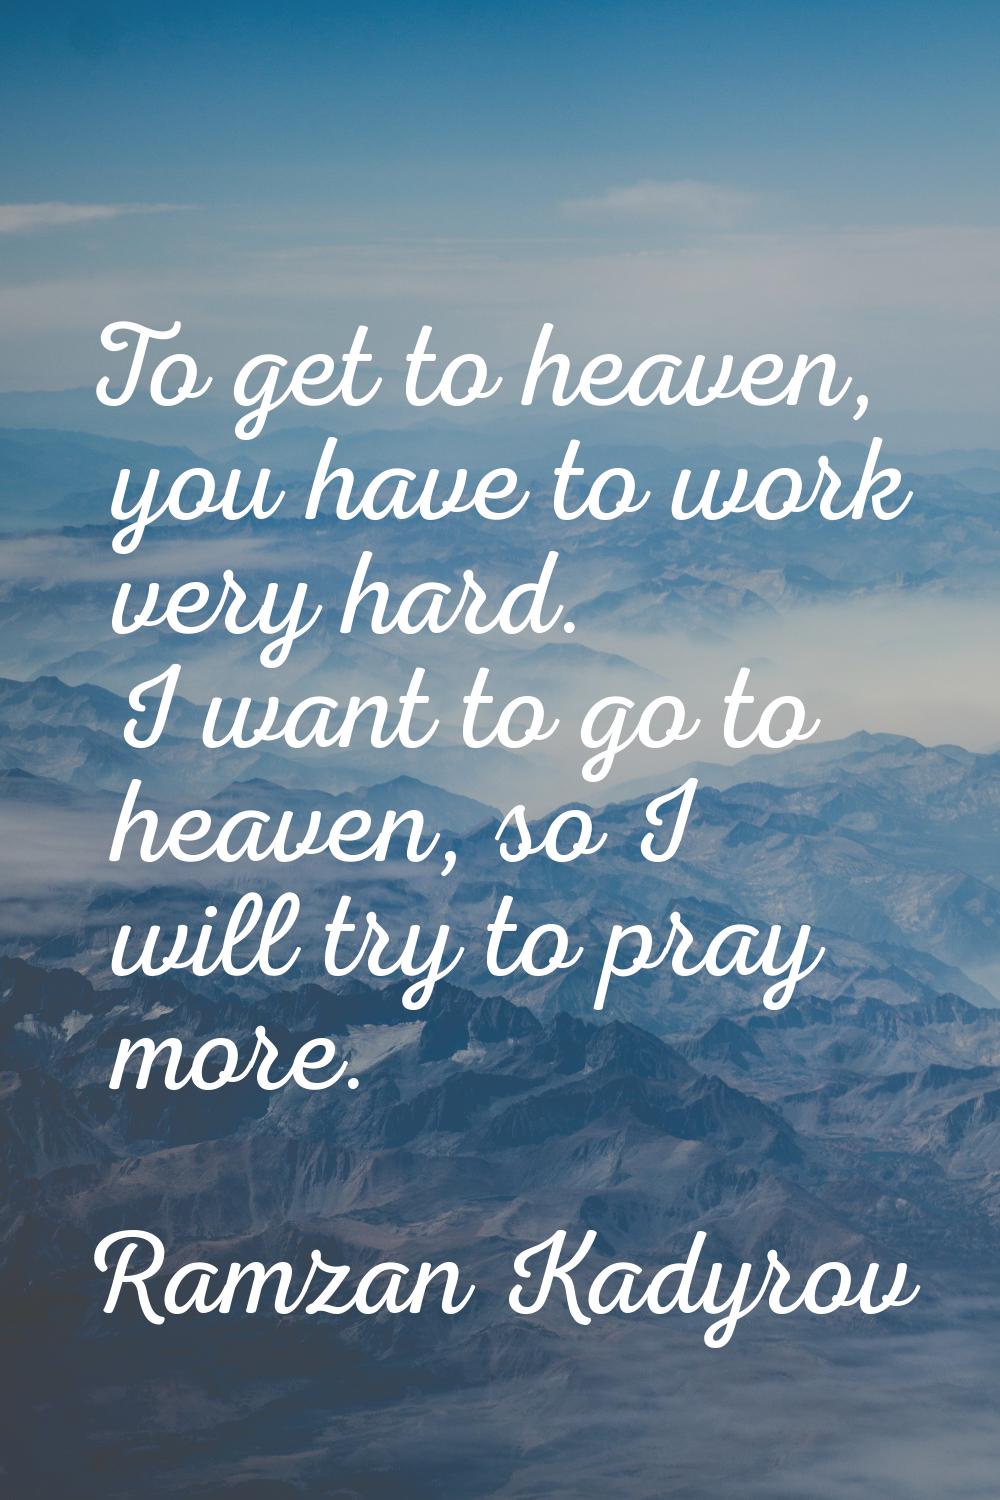 To get to heaven, you have to work very hard. I want to go to heaven, so I will try to pray more.